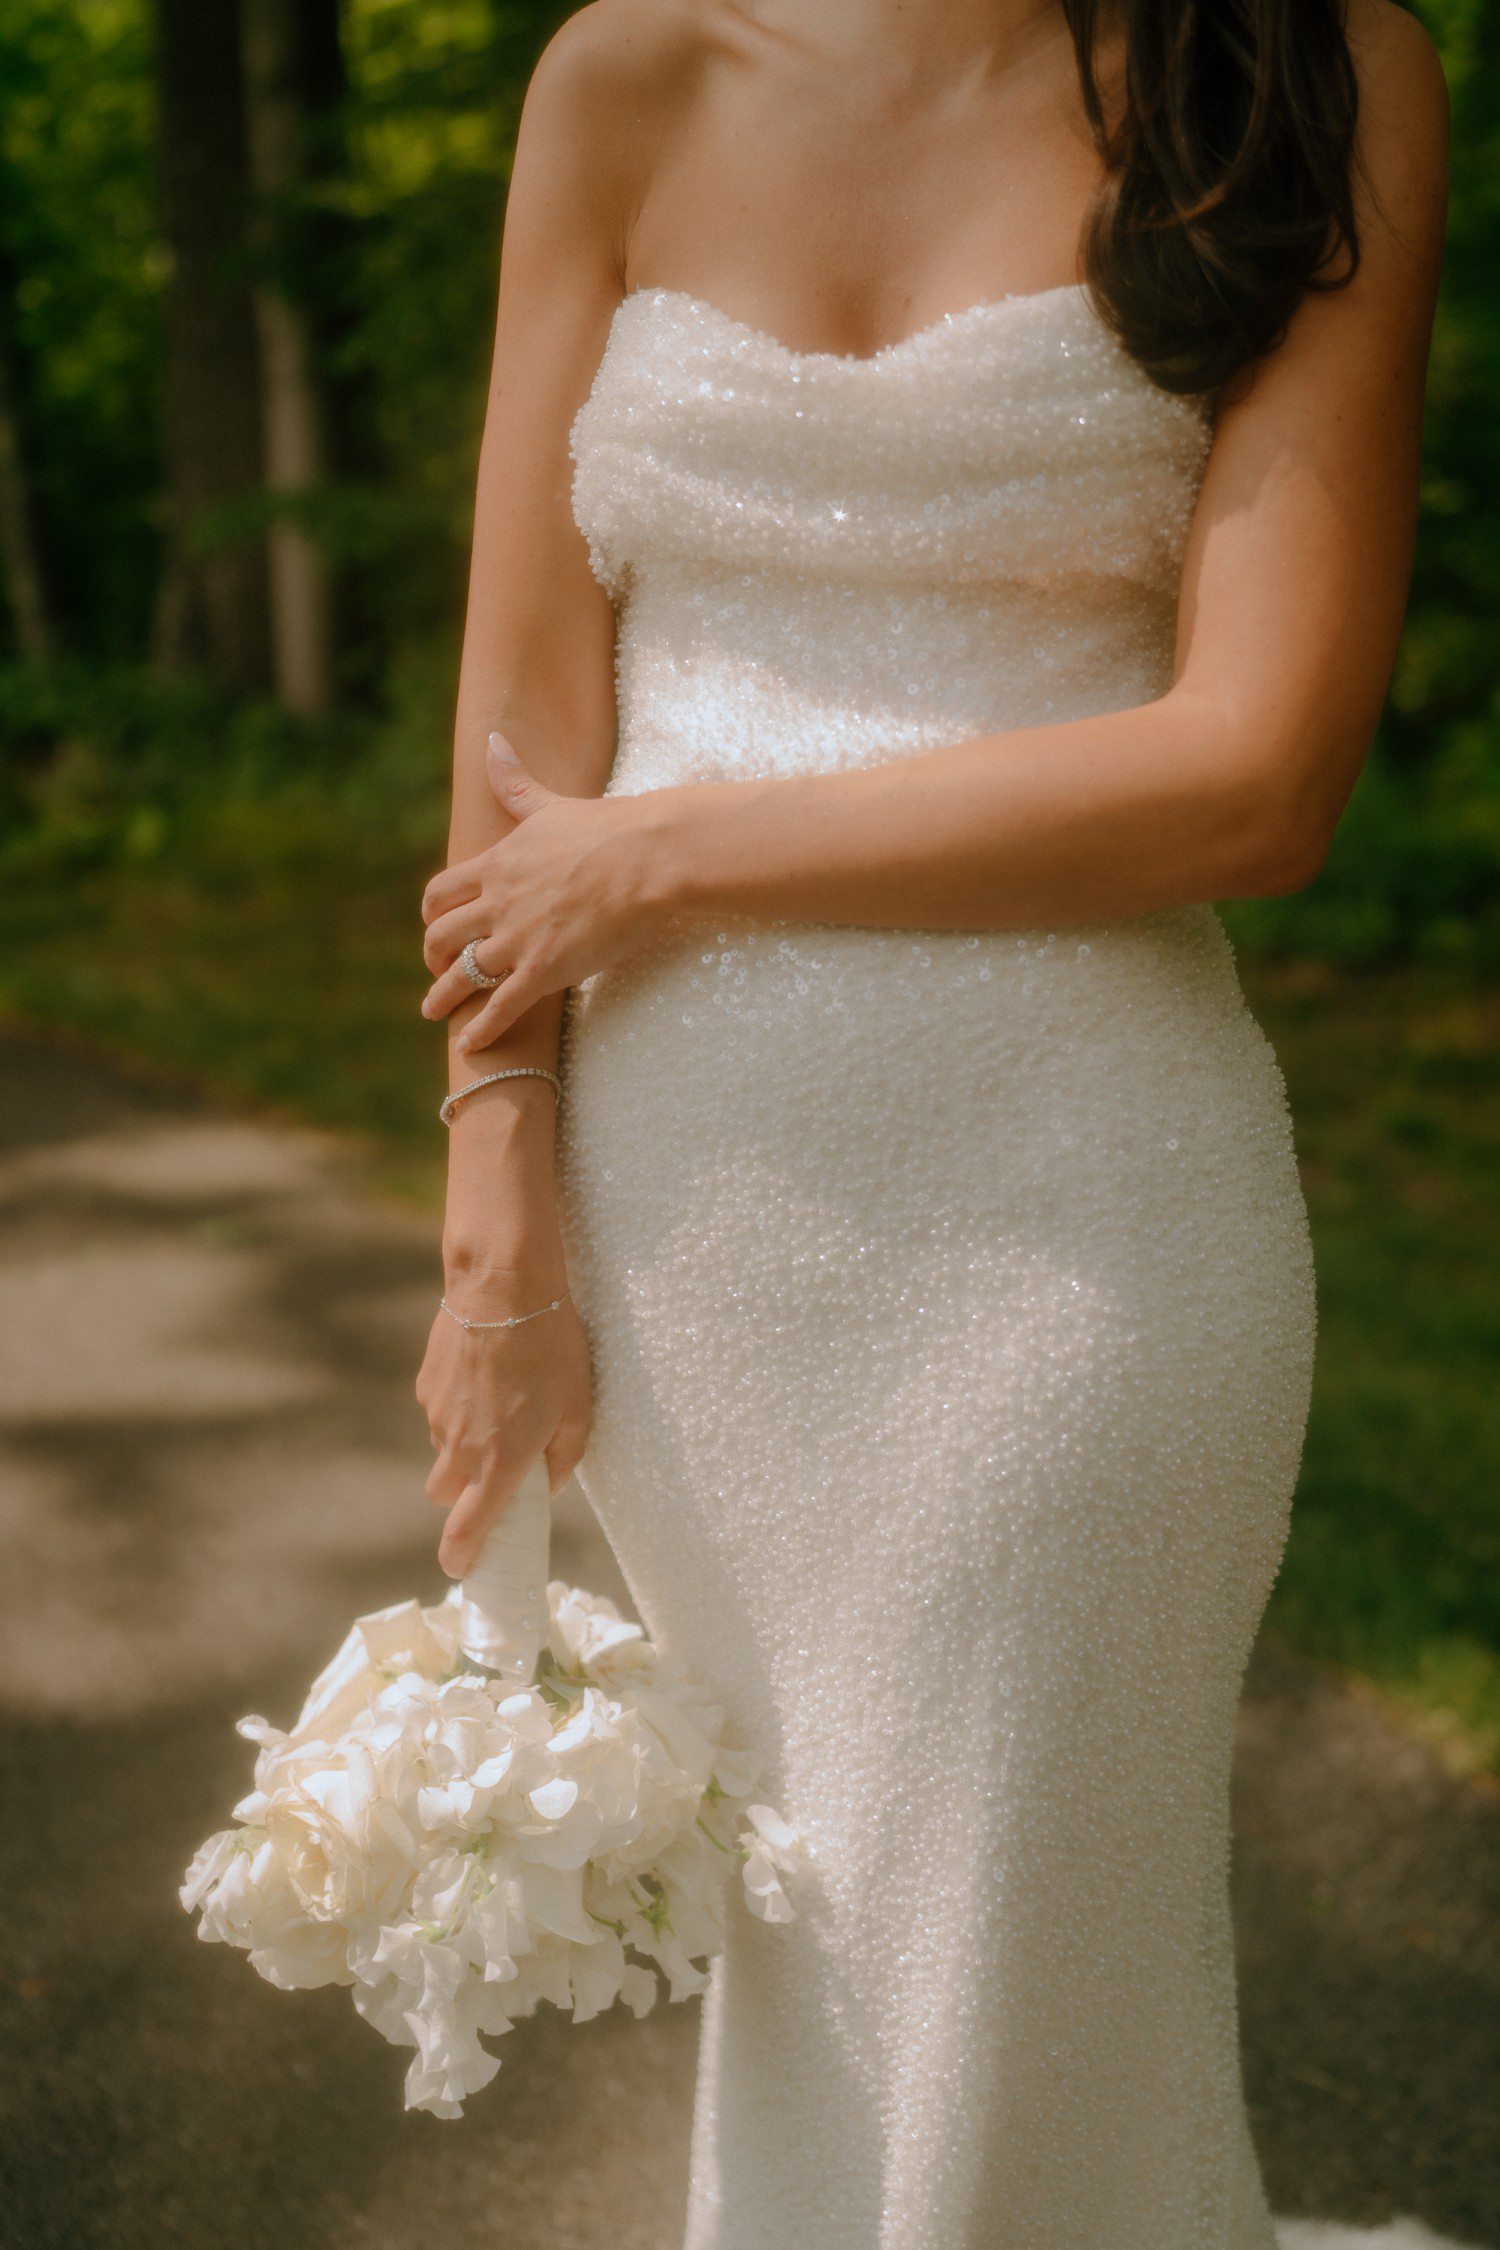 Bridal details of white bouquets and sparkly wedding dress. 